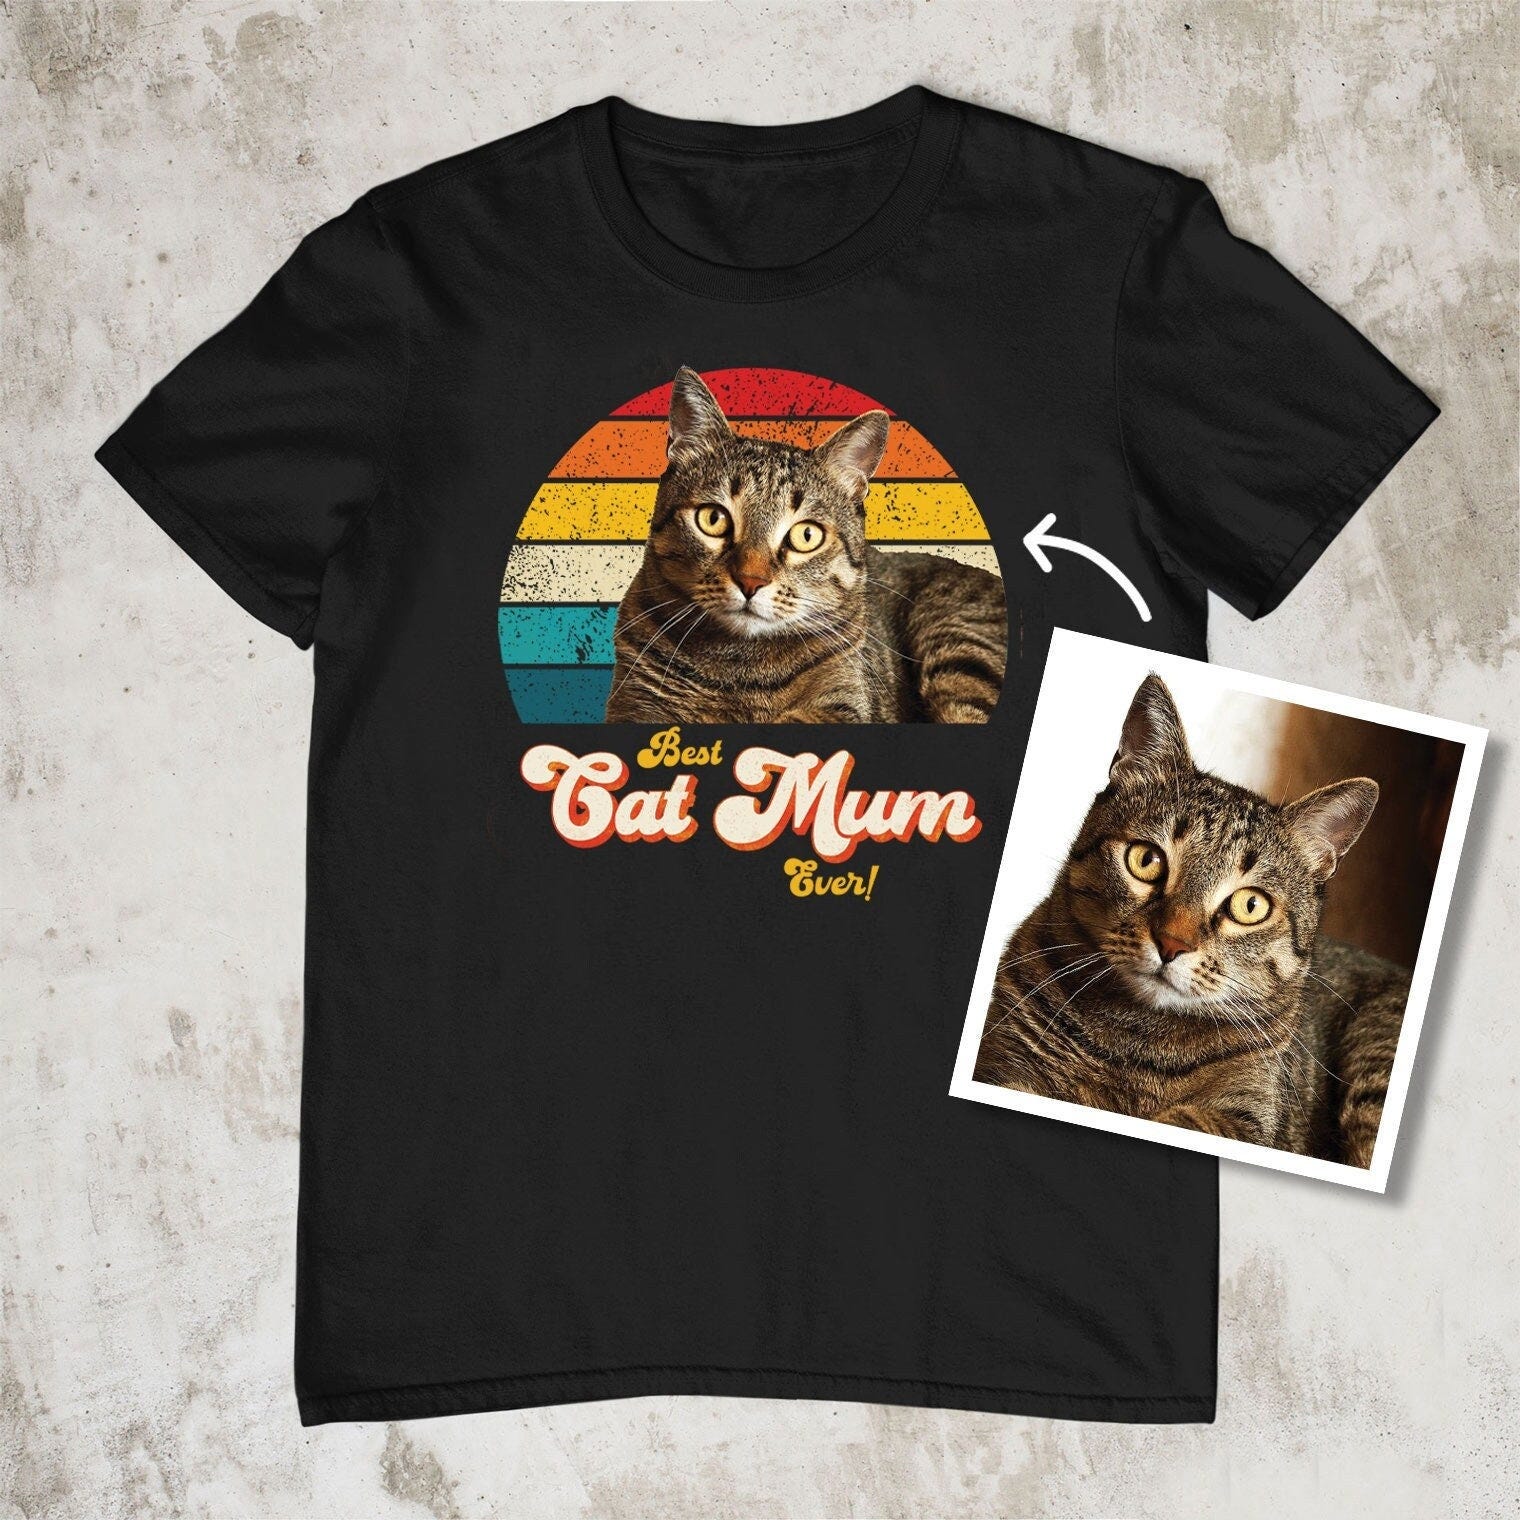 Best Cat Mum Ever personalised t shirt tshirt t-shirt. Custom cat photo face picture retro vintage. Gift for her birthday present from Cat